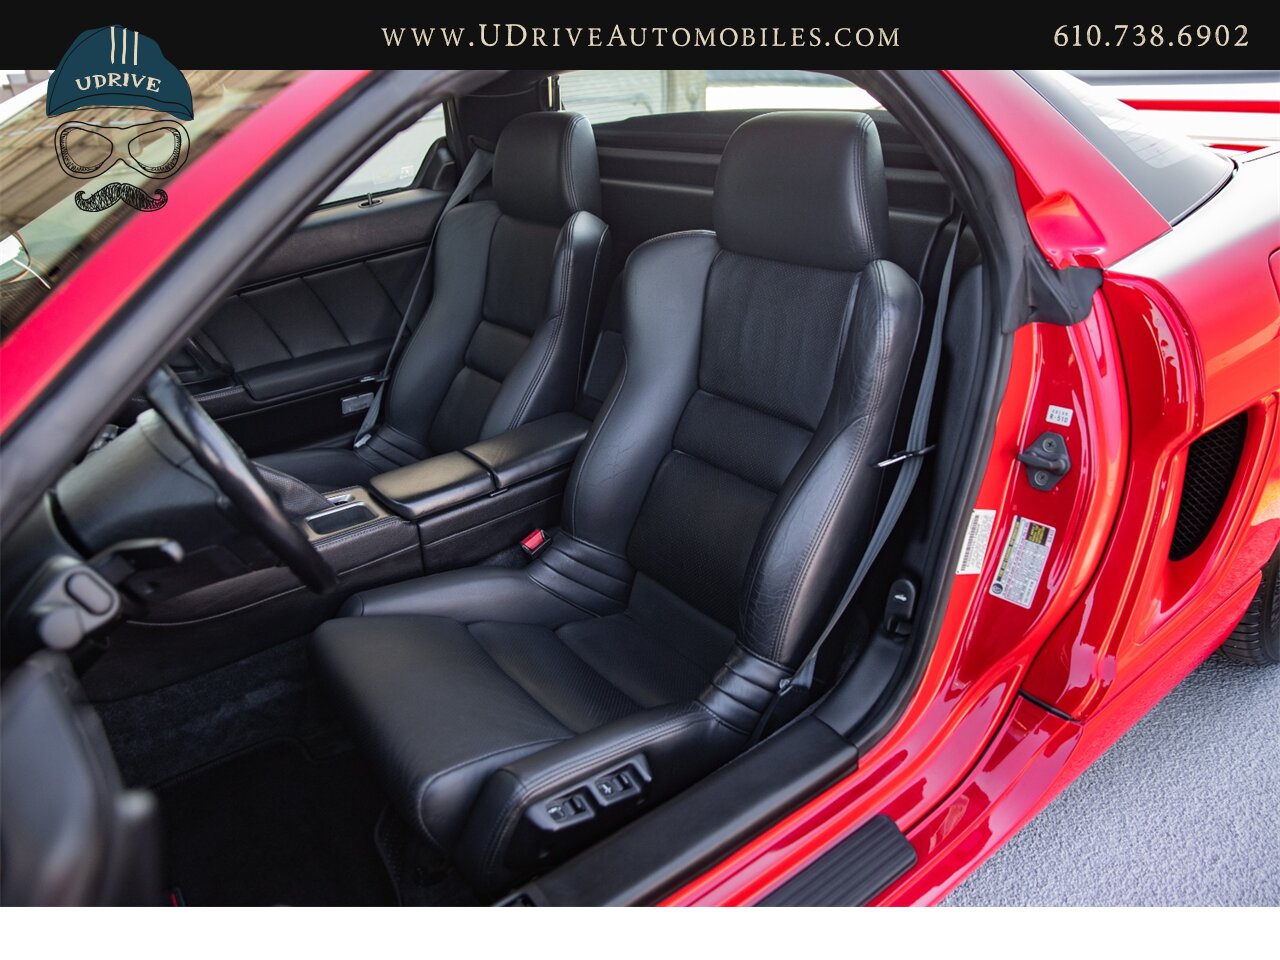 2004 Acura NSX NSX-T 21k mIles Red over Black  Fresh Timing Belt Service - Photo 26 - West Chester, PA 19382